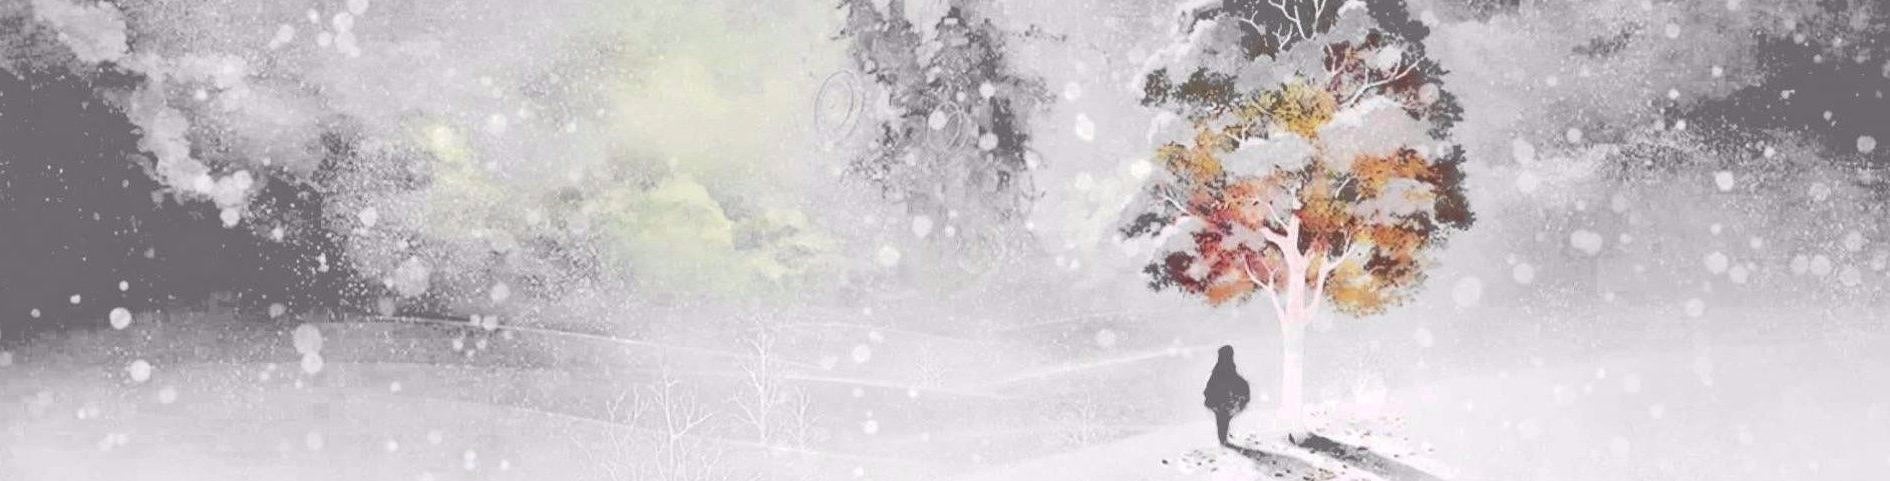 Image for I am Setsuna on Switch is a visual match for PS4